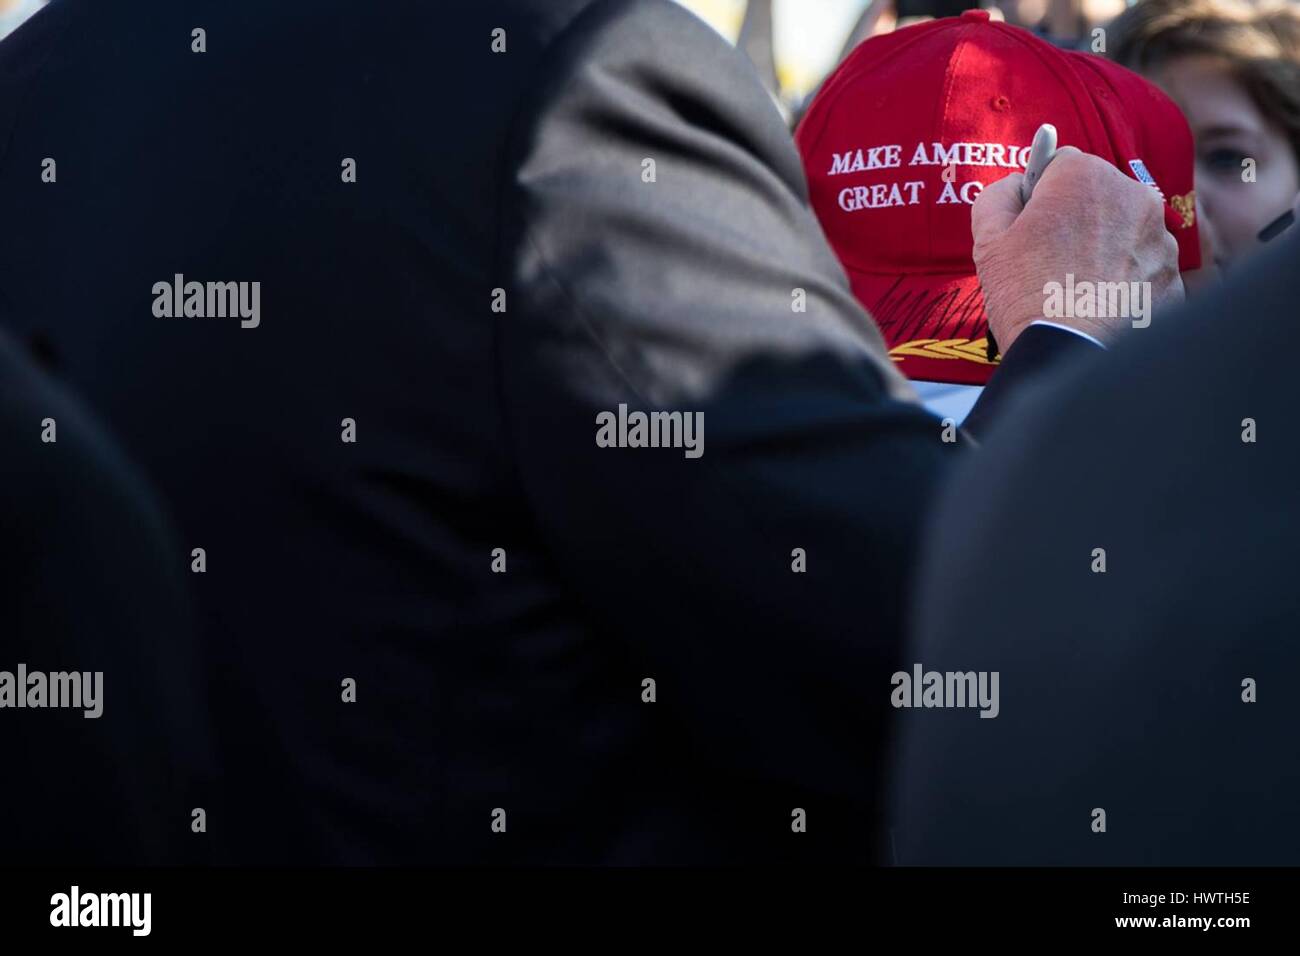 U.S President Donald Trump signs a hat for a greeter after arriving at the Palm Beach International Airport February 3, 2017 in Palm Beach, Florida. Stock Photo